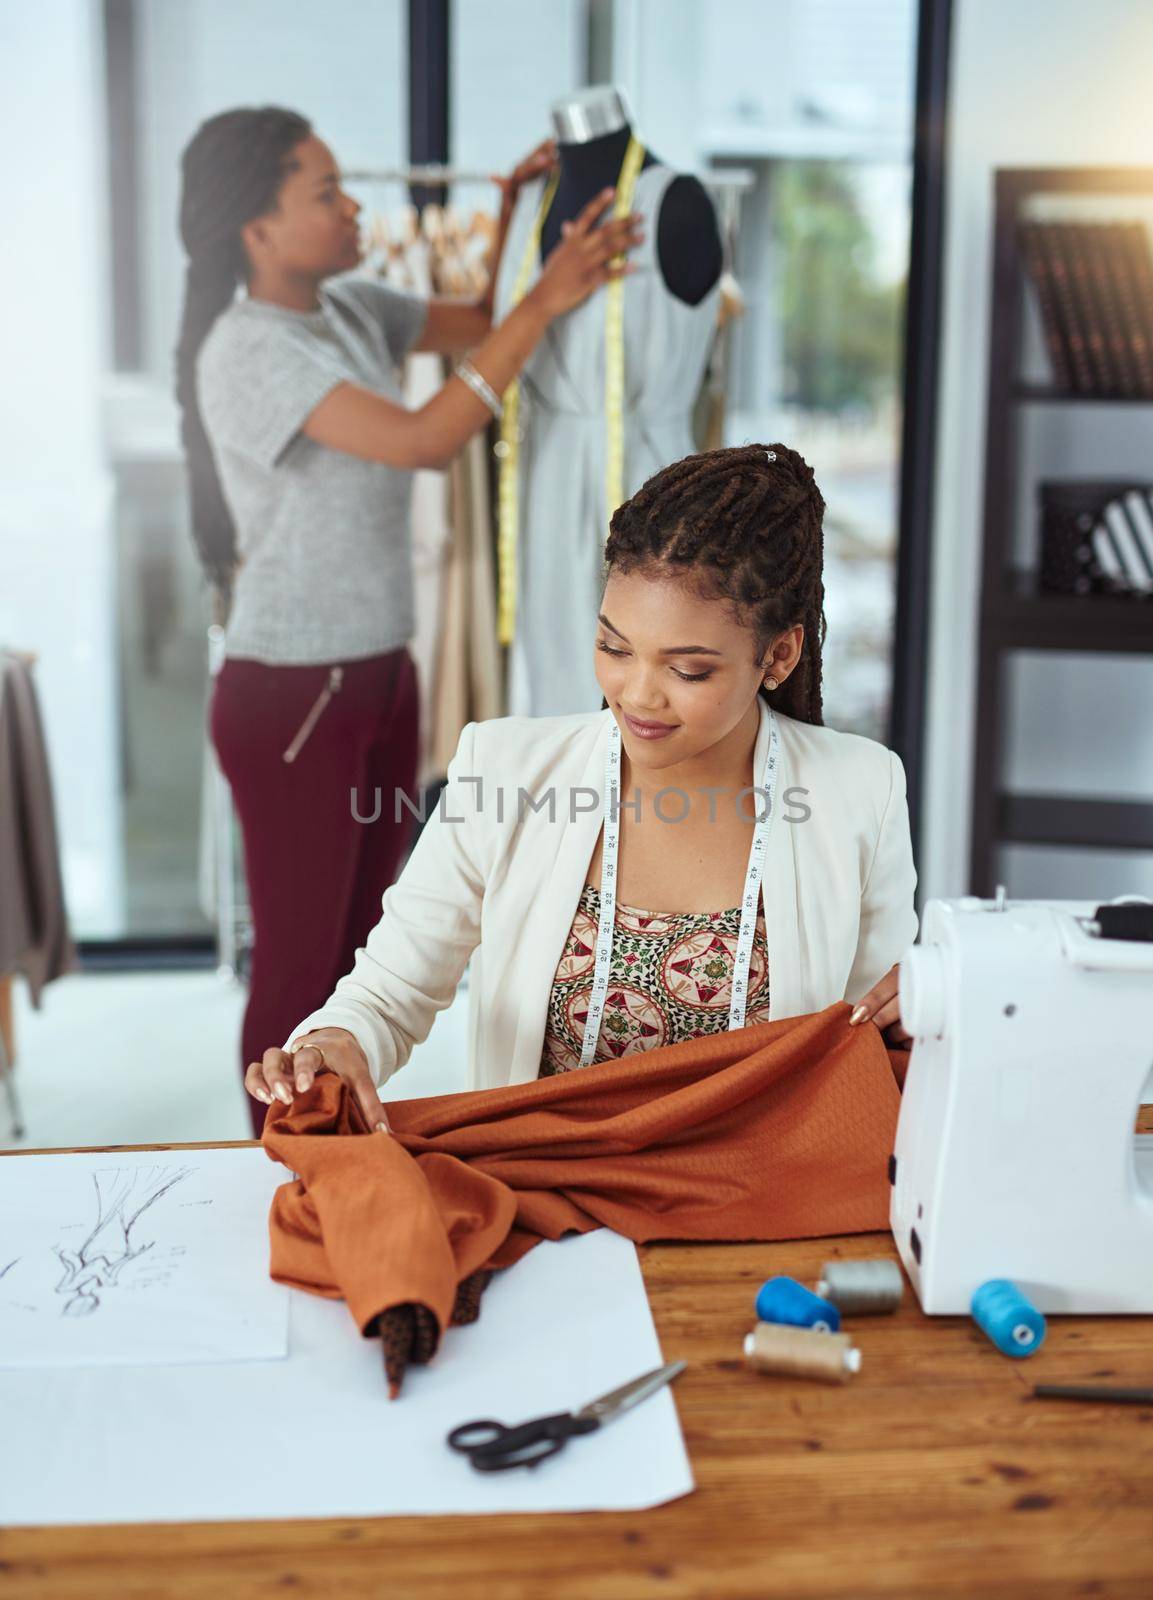 Shot of a young fashion designer sewing garments while a colleague works on a mannequin in the background.